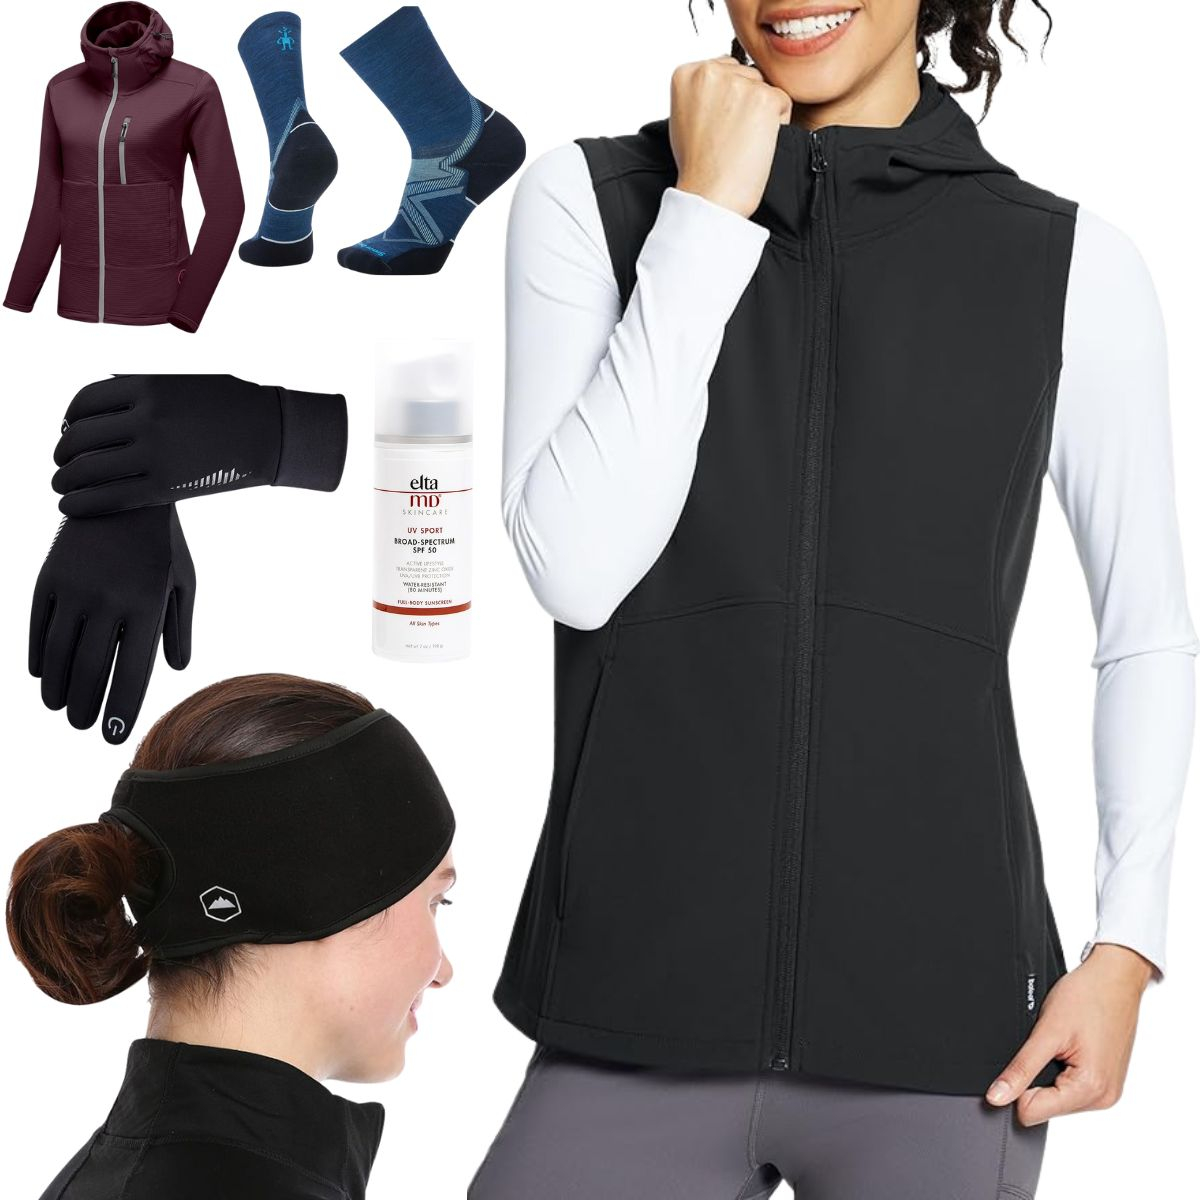 Winter Running Gear Must-Haves for When It’s Too Damn Cold Out